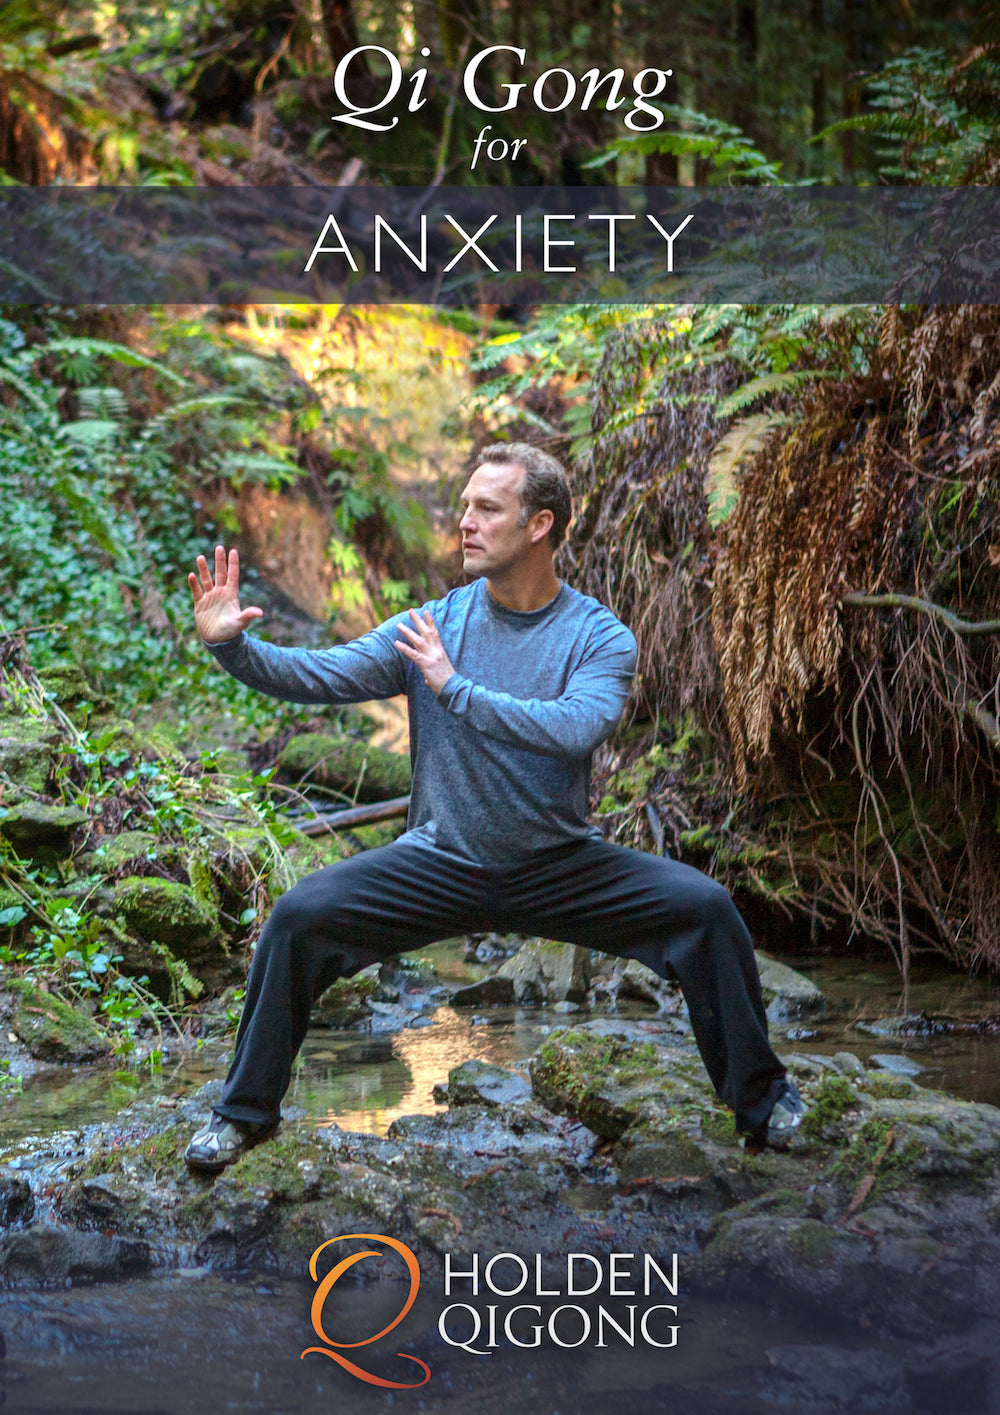 Qi Gong for Anxiety DVD with Lee Holden - Budovideos Inc